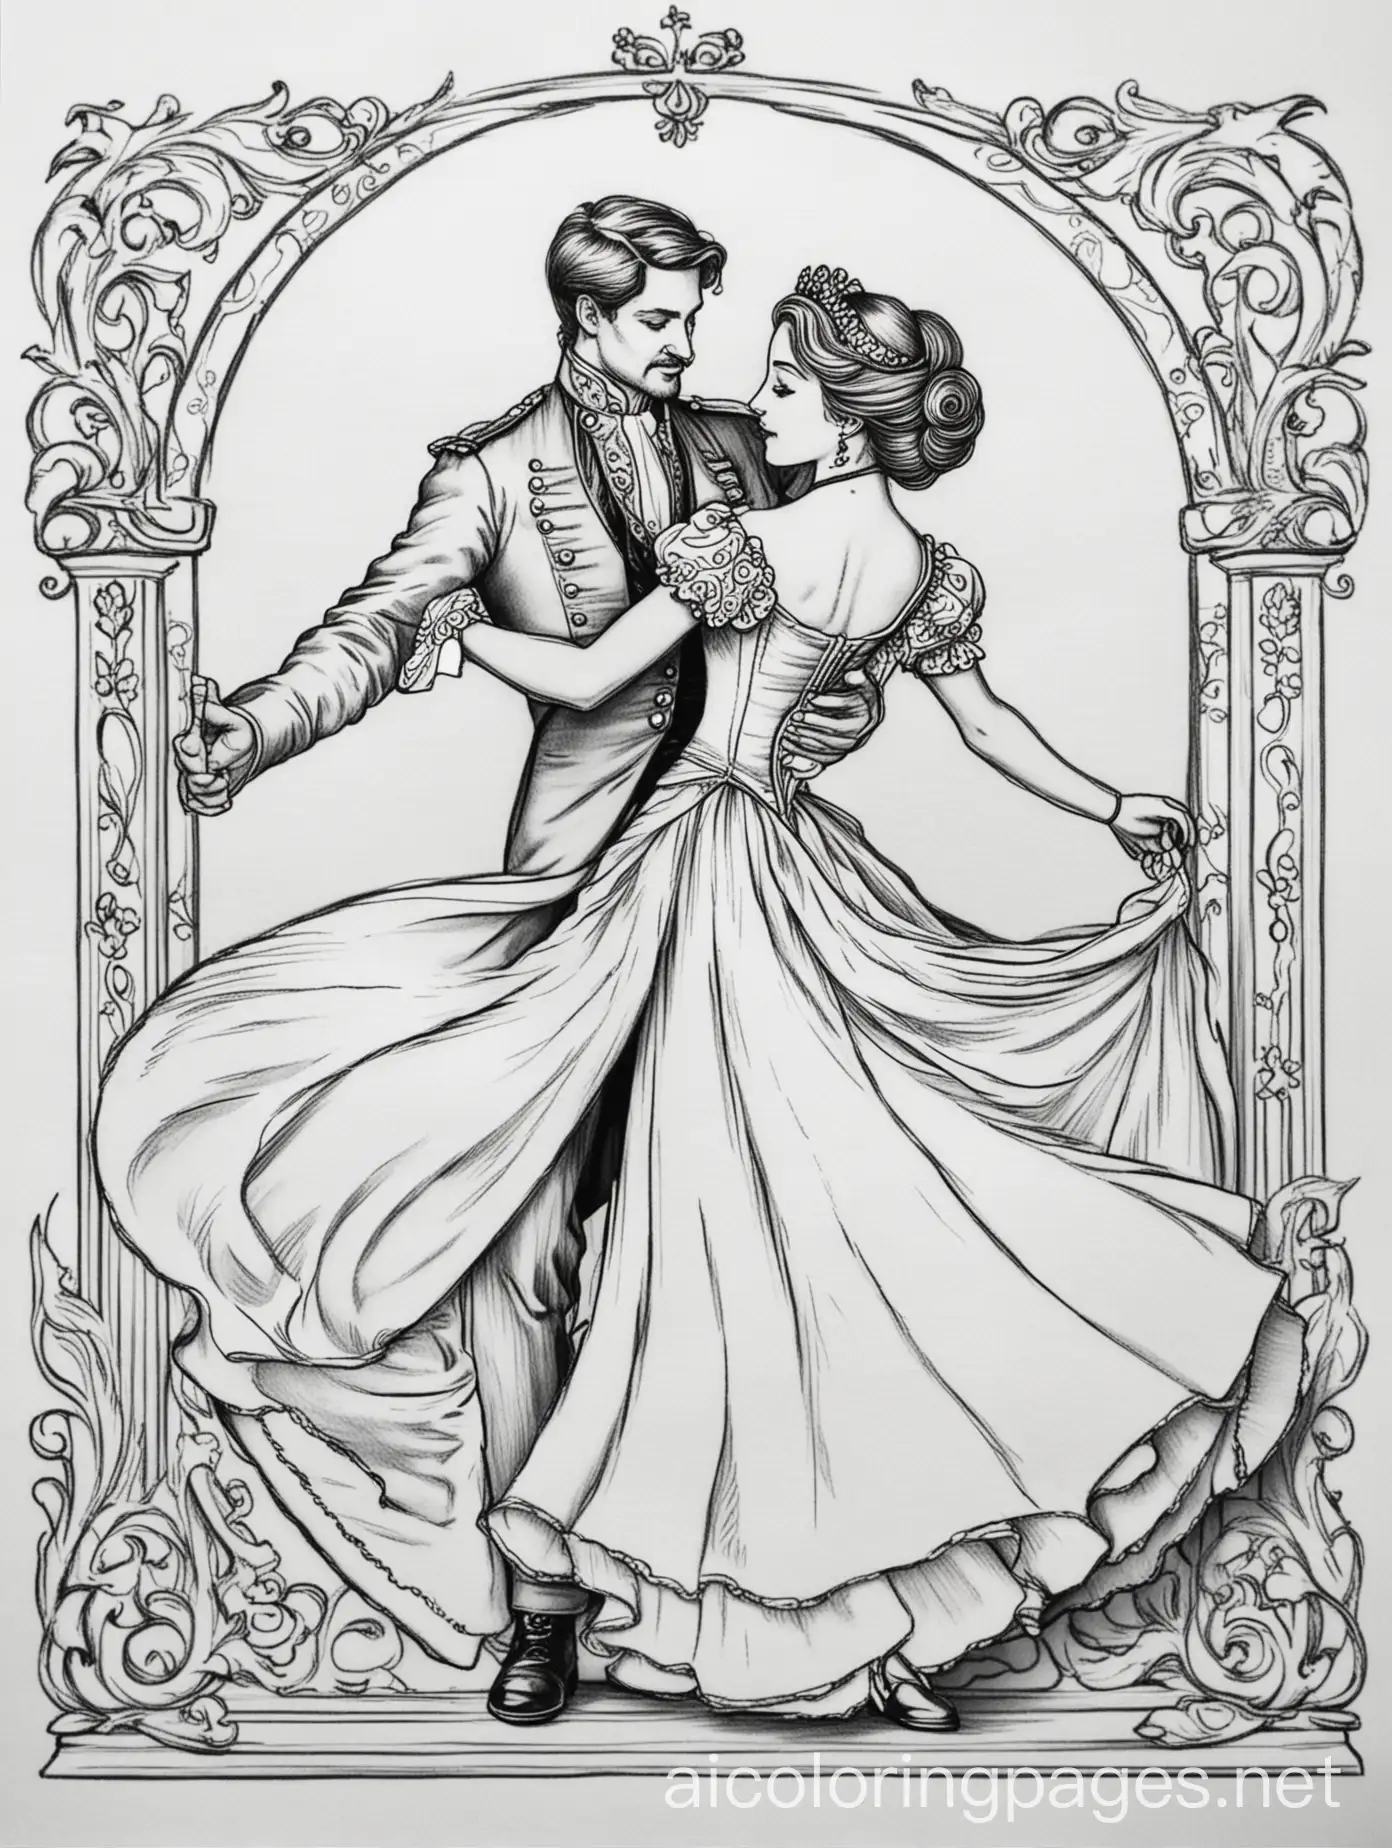 Royal ball with a couple dancing , Coloring Page, black and white, line art, white background, Simplicity, Ample White Space. The background of the coloring page is plain white to make it easy for young children to color within the lines. The outlines of all the subjects are easy to distinguish, making it simple for kids to color without too much difficulty